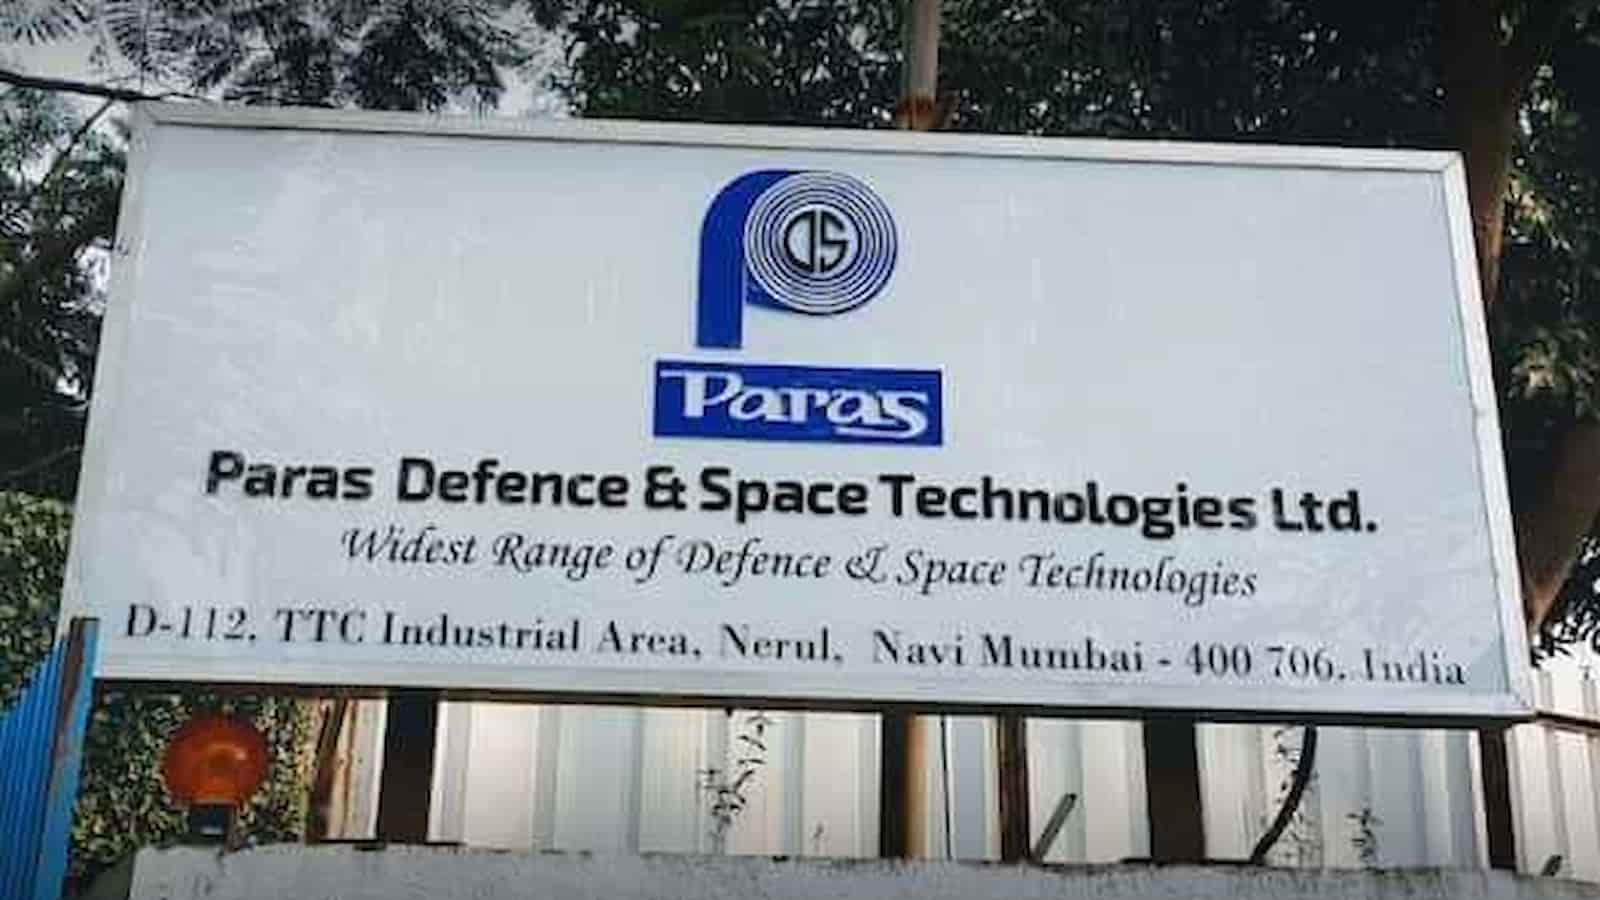 Stock falls 3% after Paras Defence and Space Technologies announces JV and new subsidiary